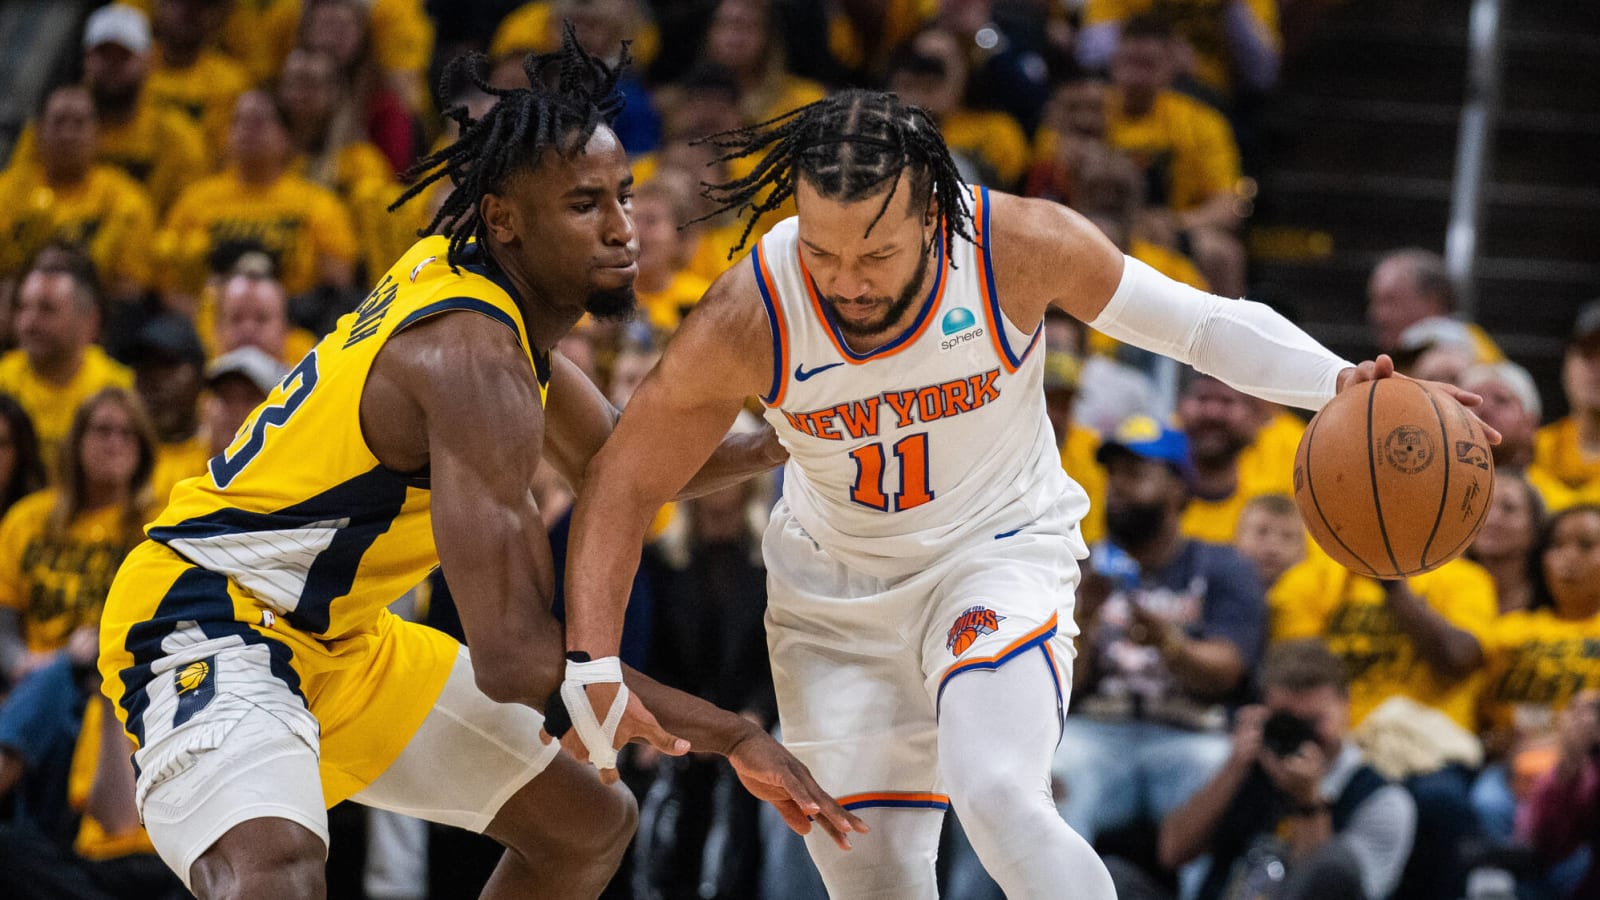 Knicks Don’t Seek ‘Pity’ For Injuries After Game 4 Loss Against Pacers